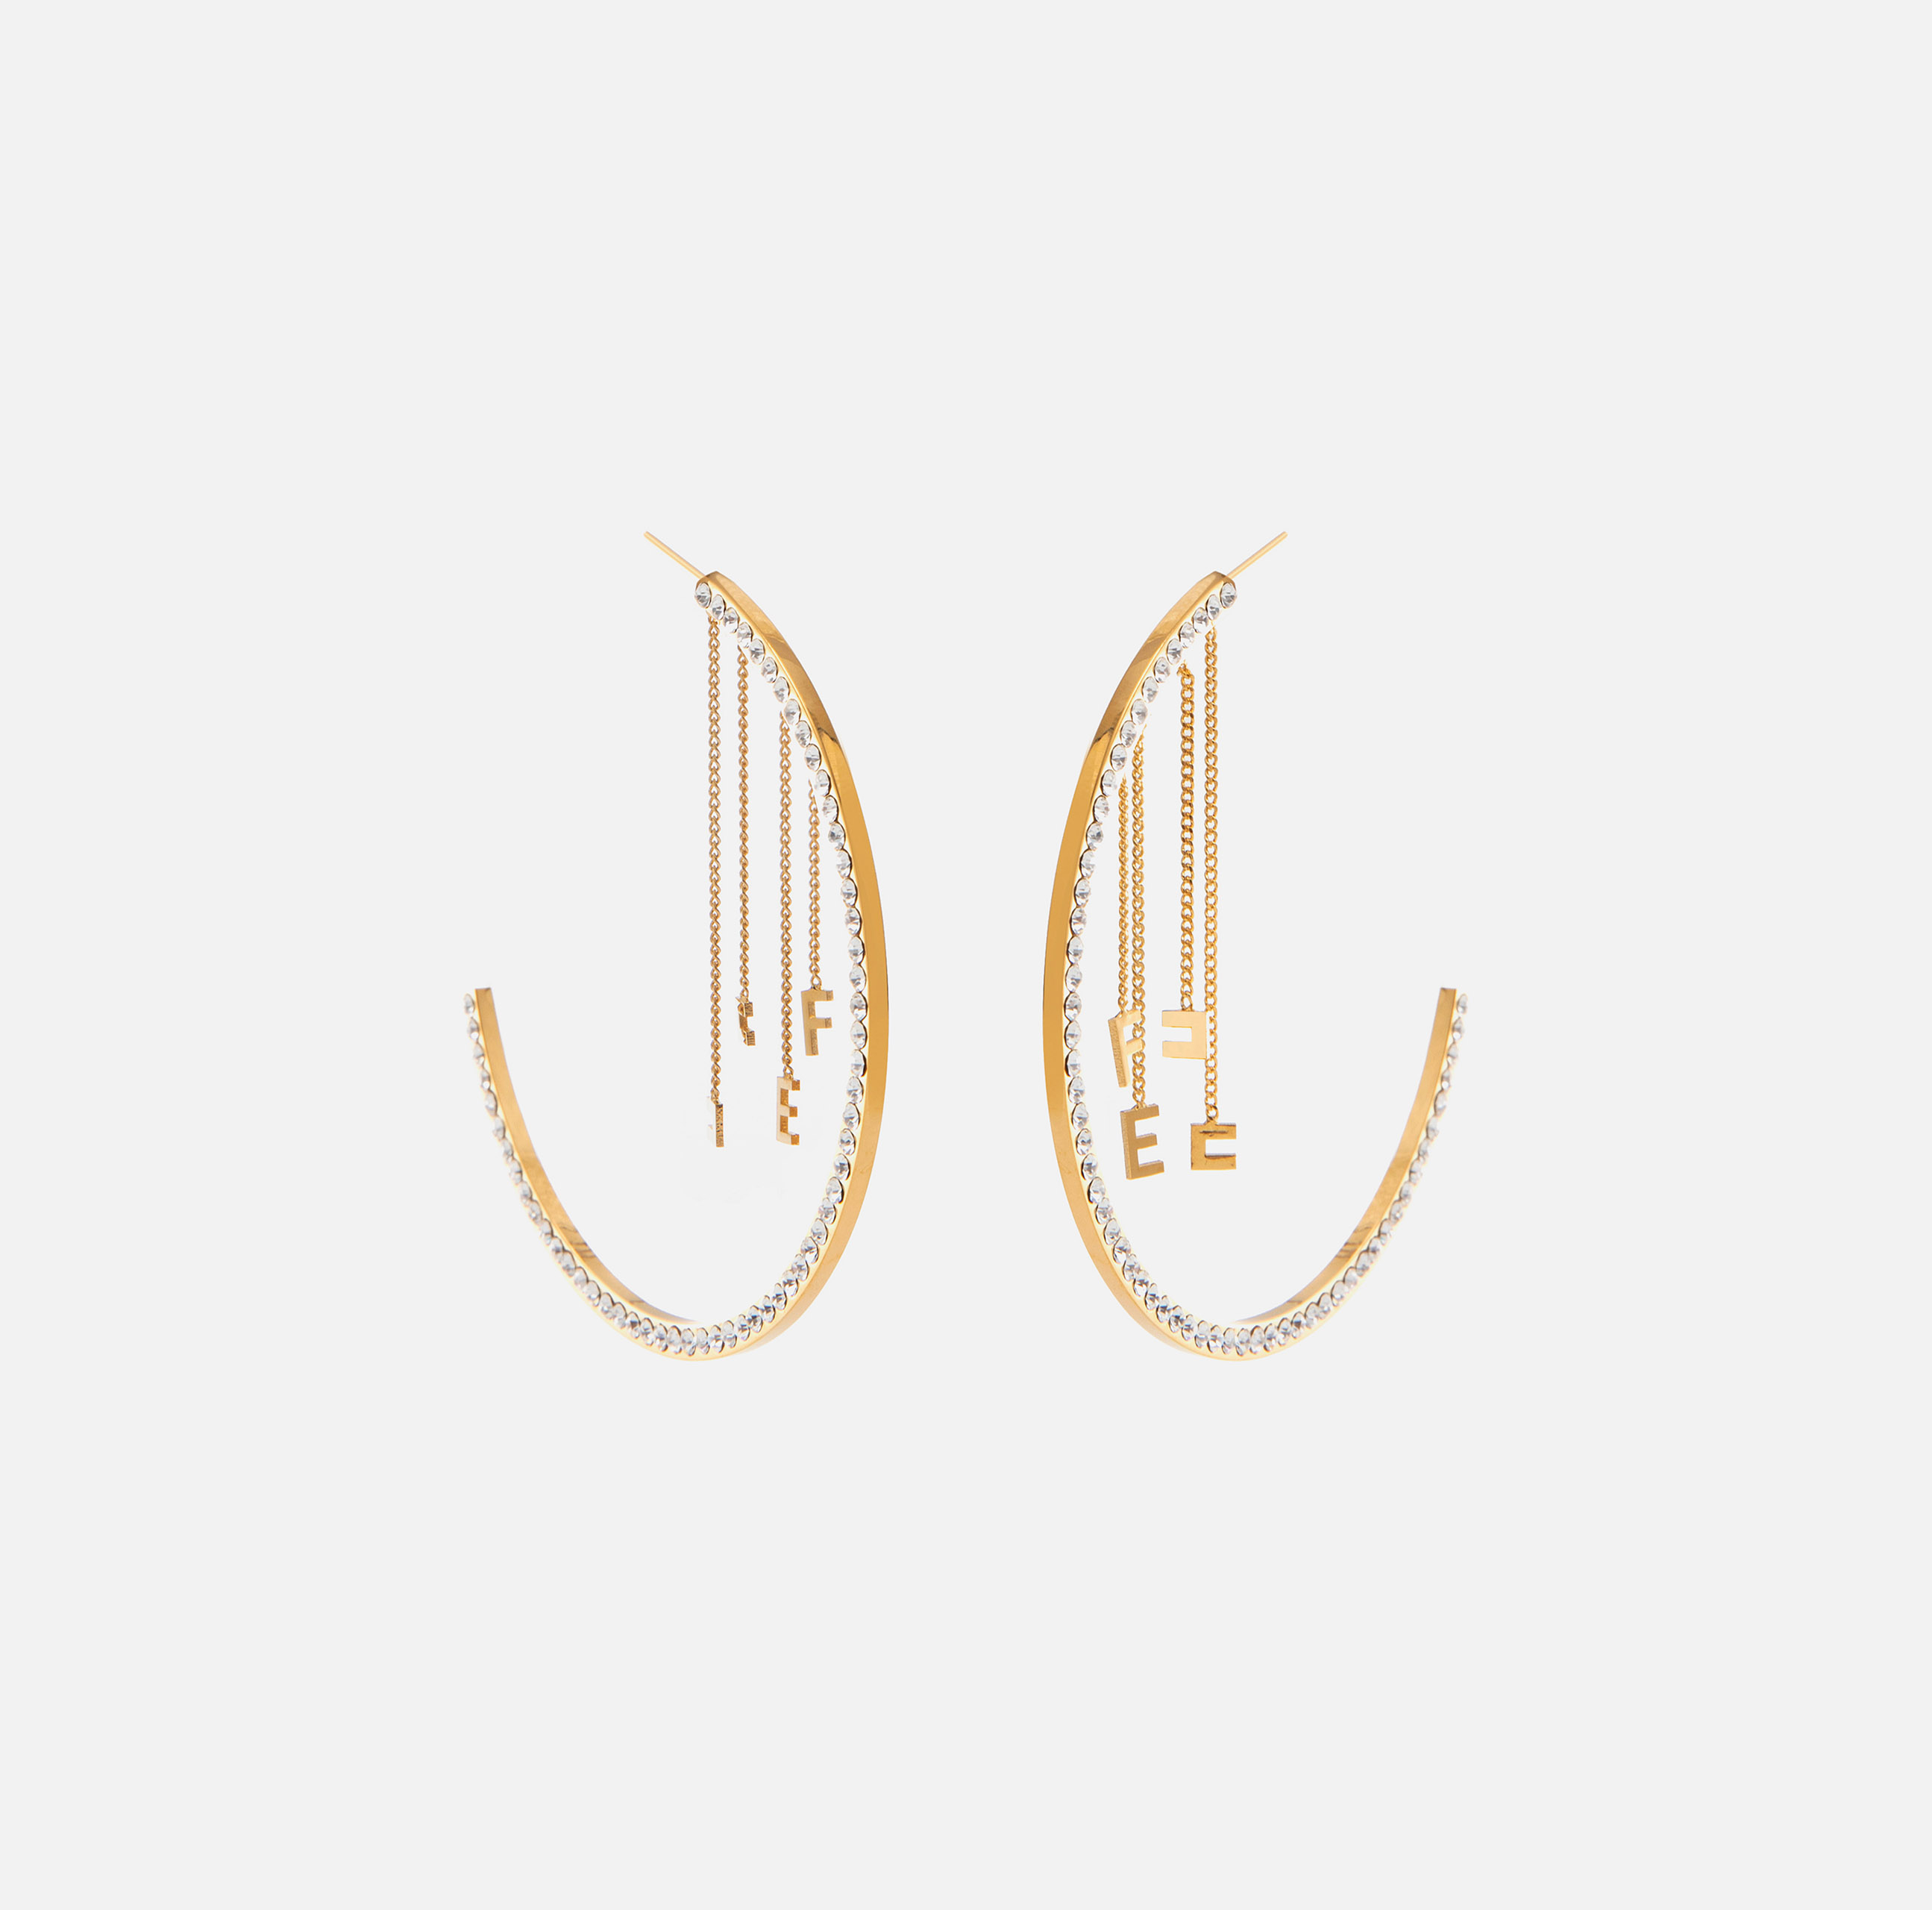 Hoop earrings with groumette and charms - ACCESSORI - Elisabetta Franchi